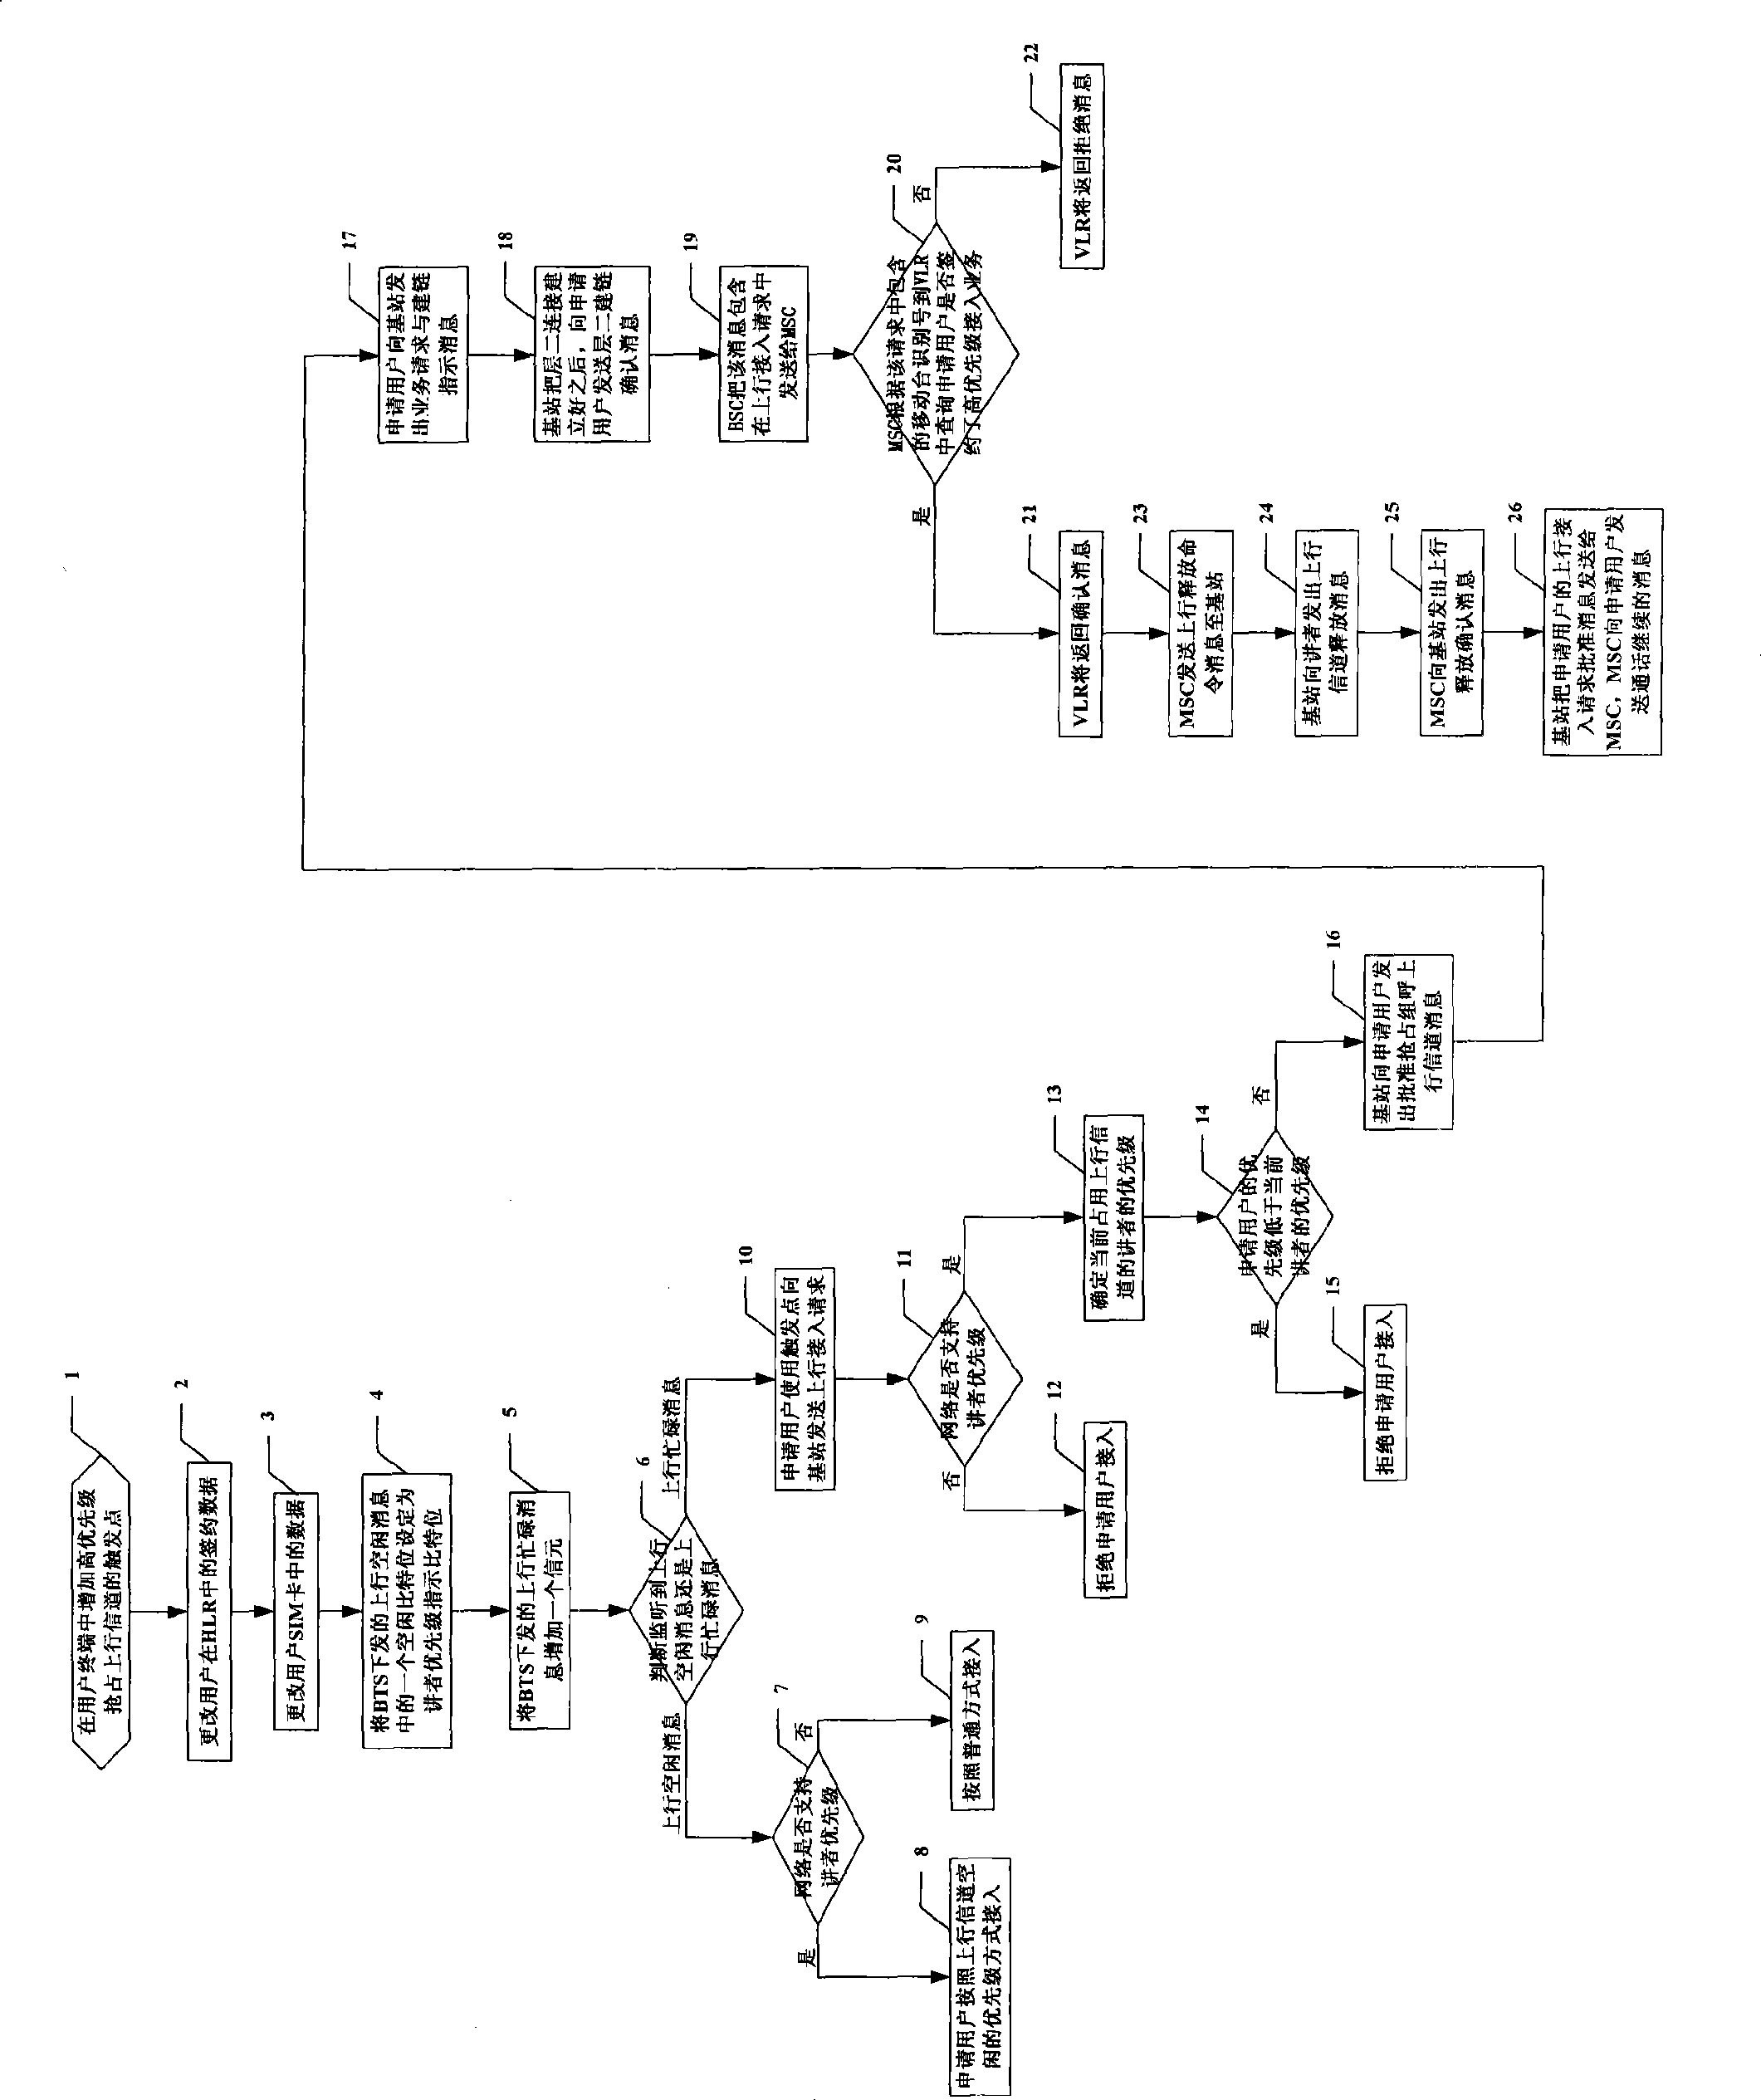 Method for implementing caller priority in voice group call service